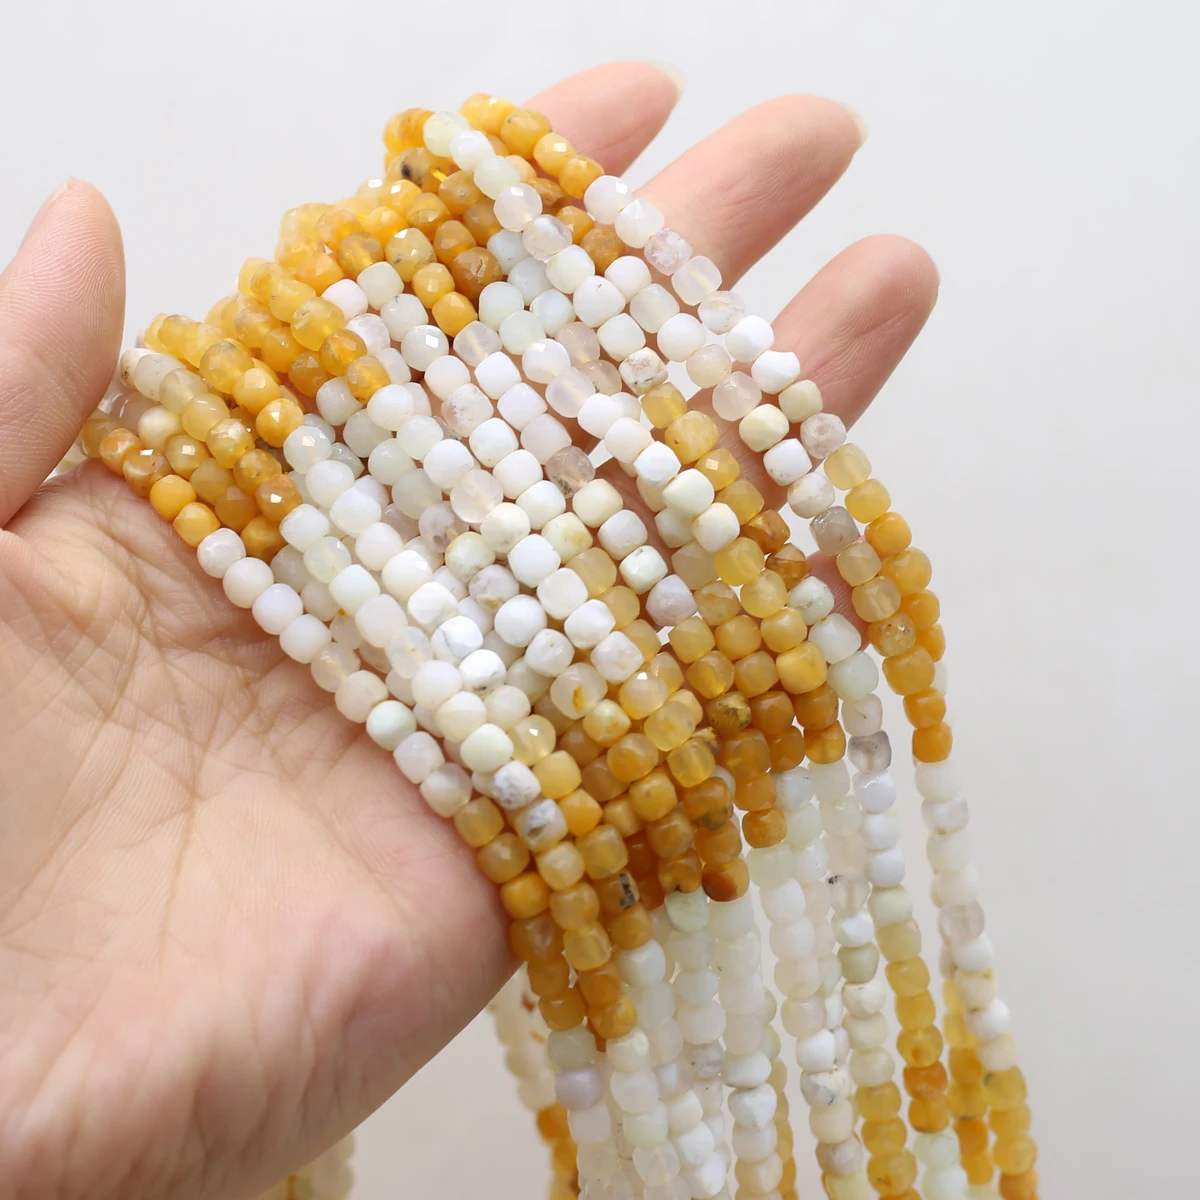 

Natural Semi-precious Stones Topaz White Jade Cut Faceted Square Loose Beads for Jewelry Making Necklace DIY Bracelet Accessorie